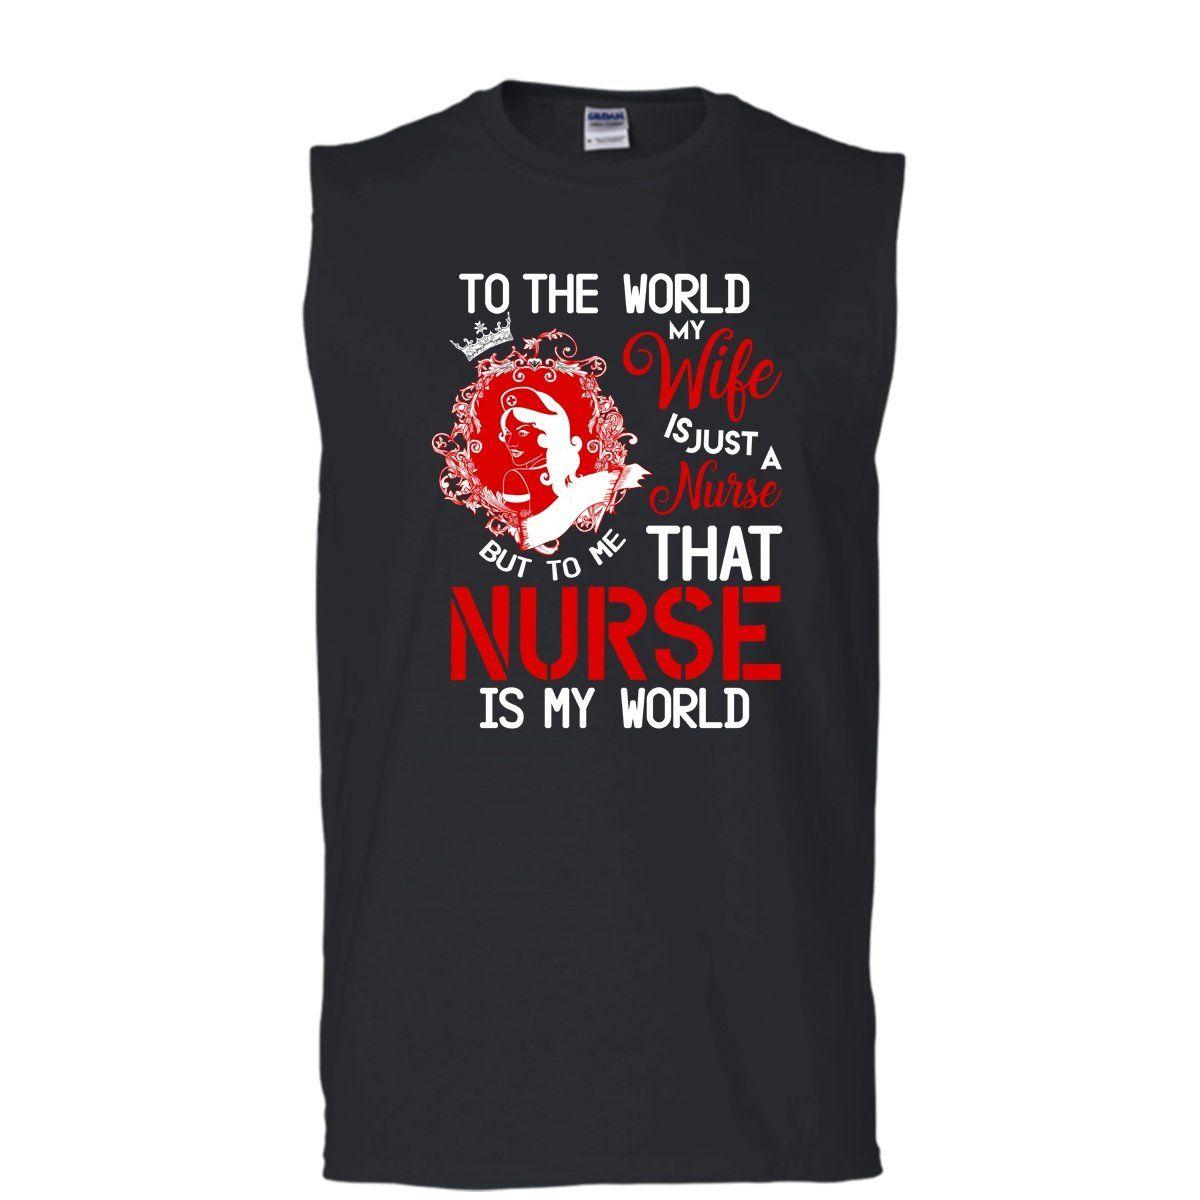 Cool MP Logo - To The World My Wife Just A Nurse T Shirt, That Nurse Is My World T ...